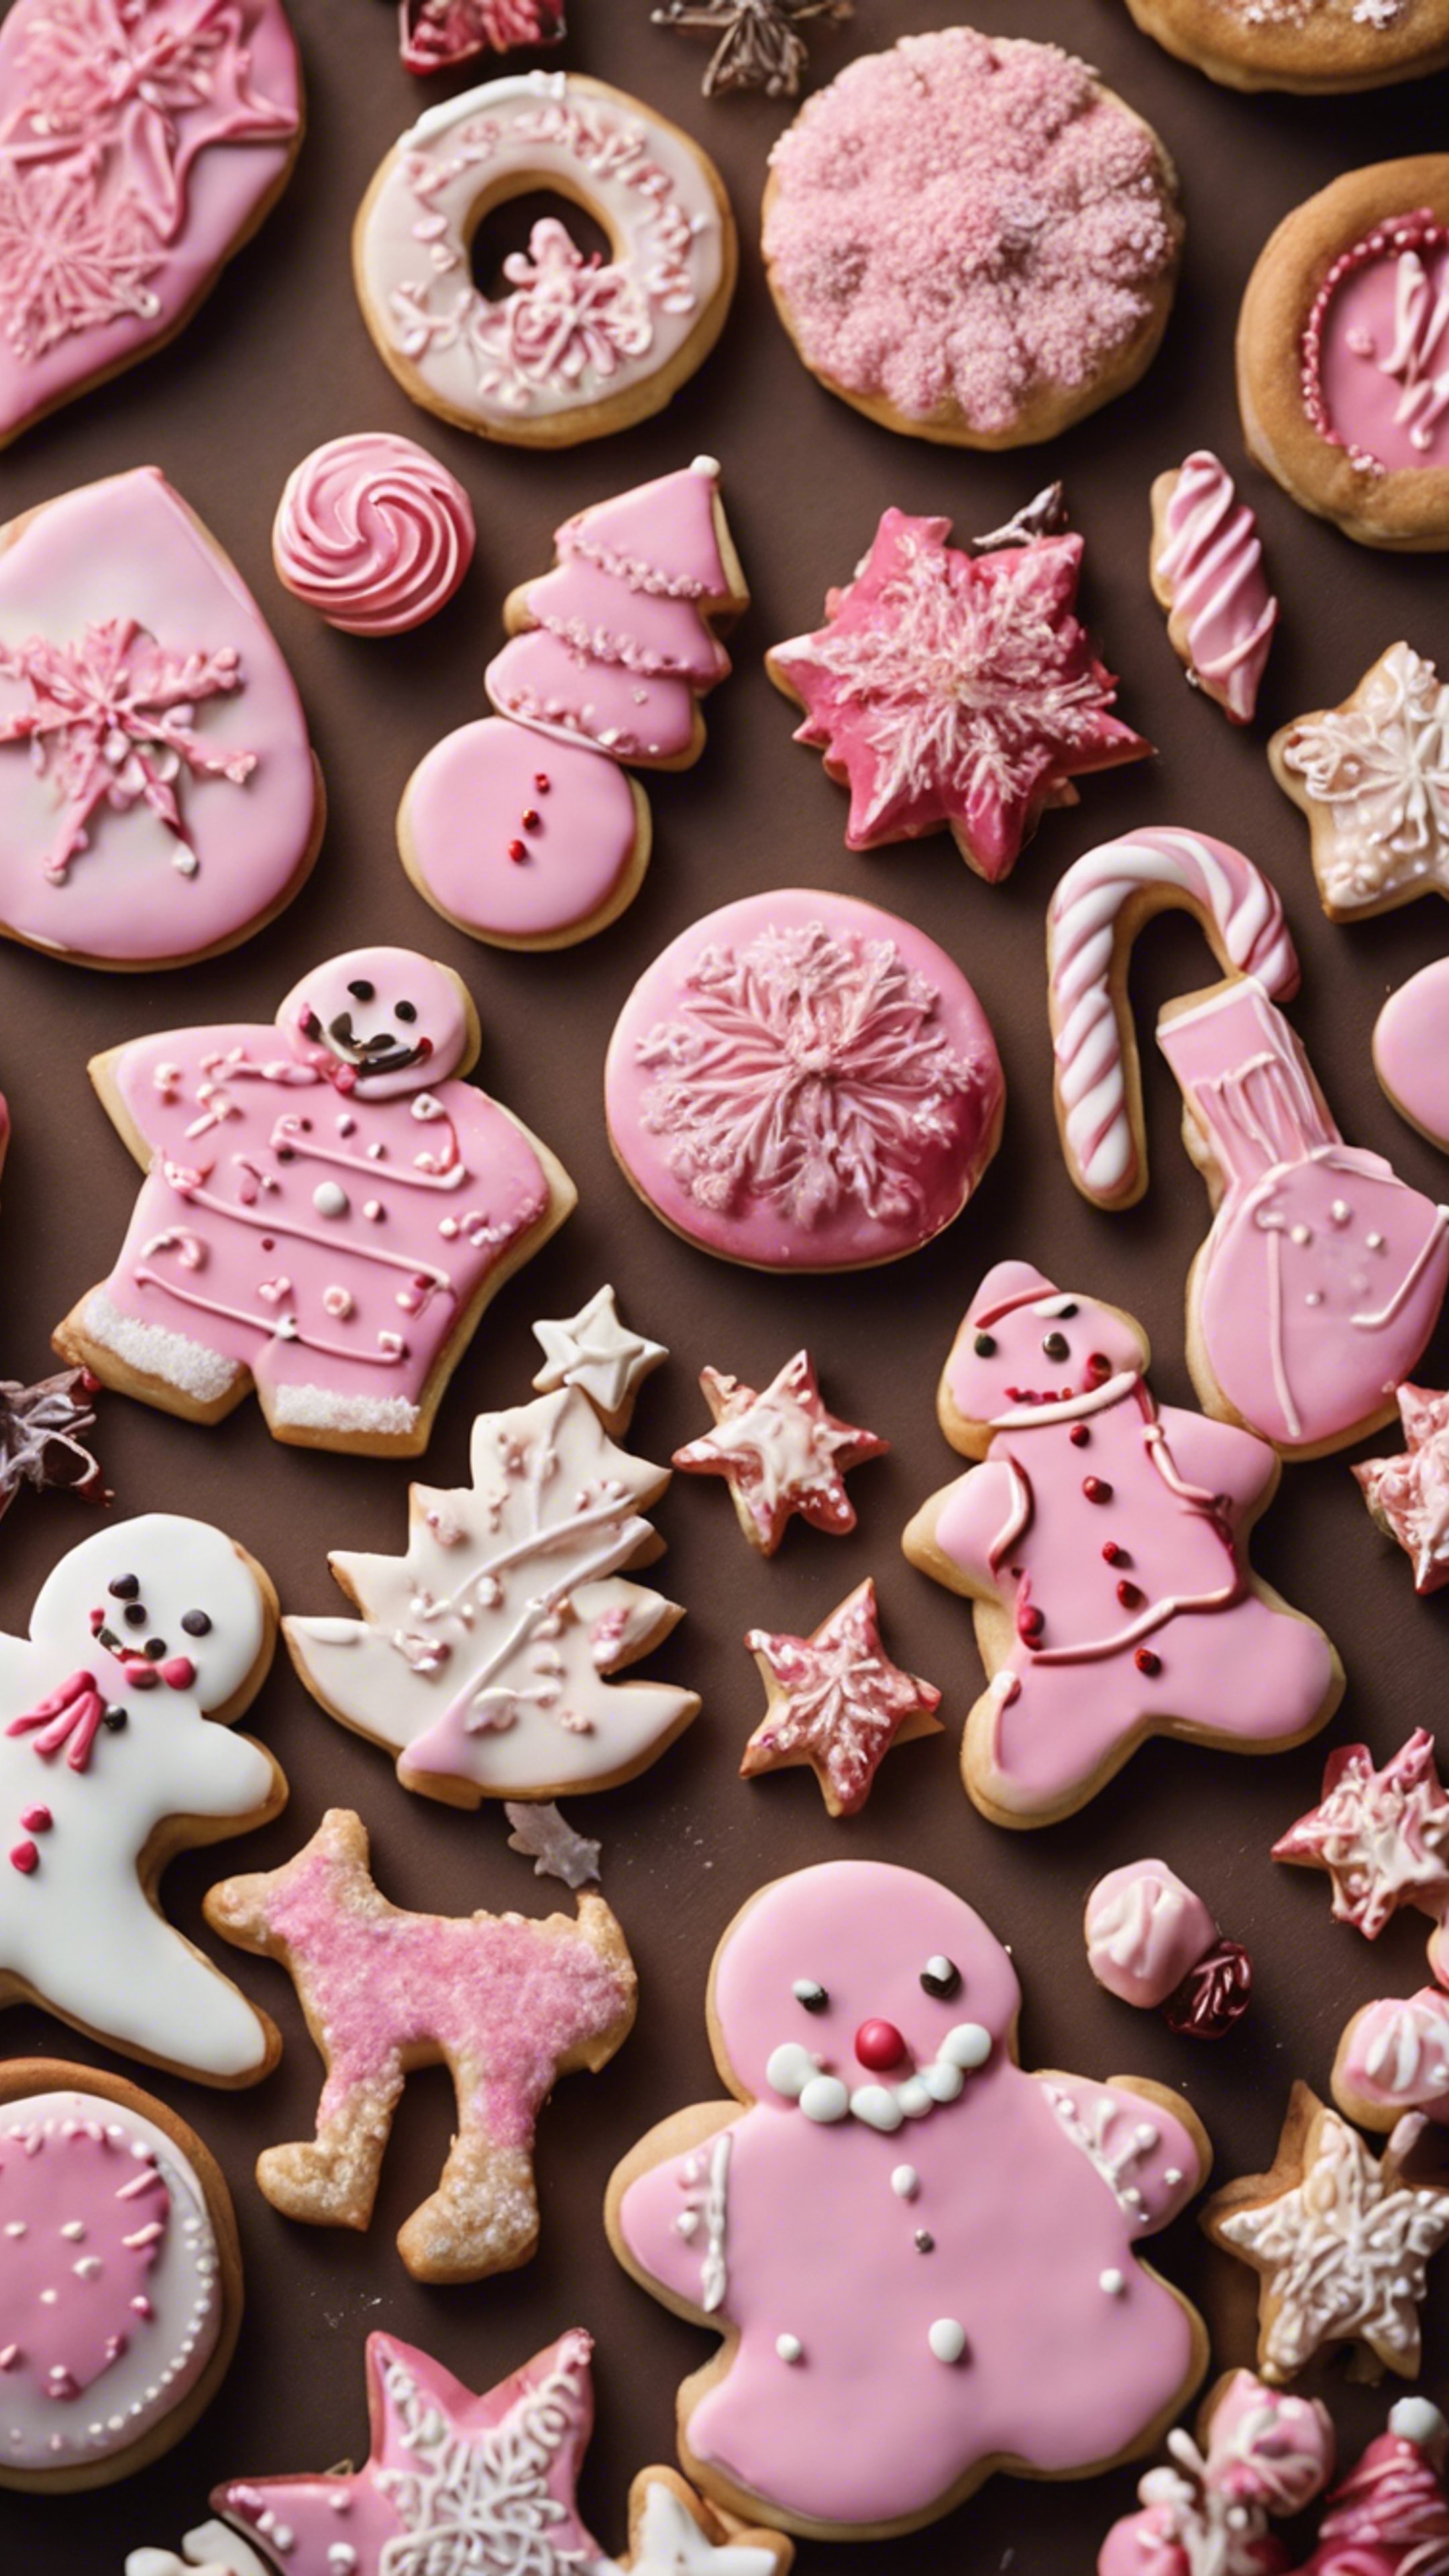 Various types of pink Christmas cookies and sweets laid on a table with festive decorations. Tapet[bb72647e6a9944a5b5aa]